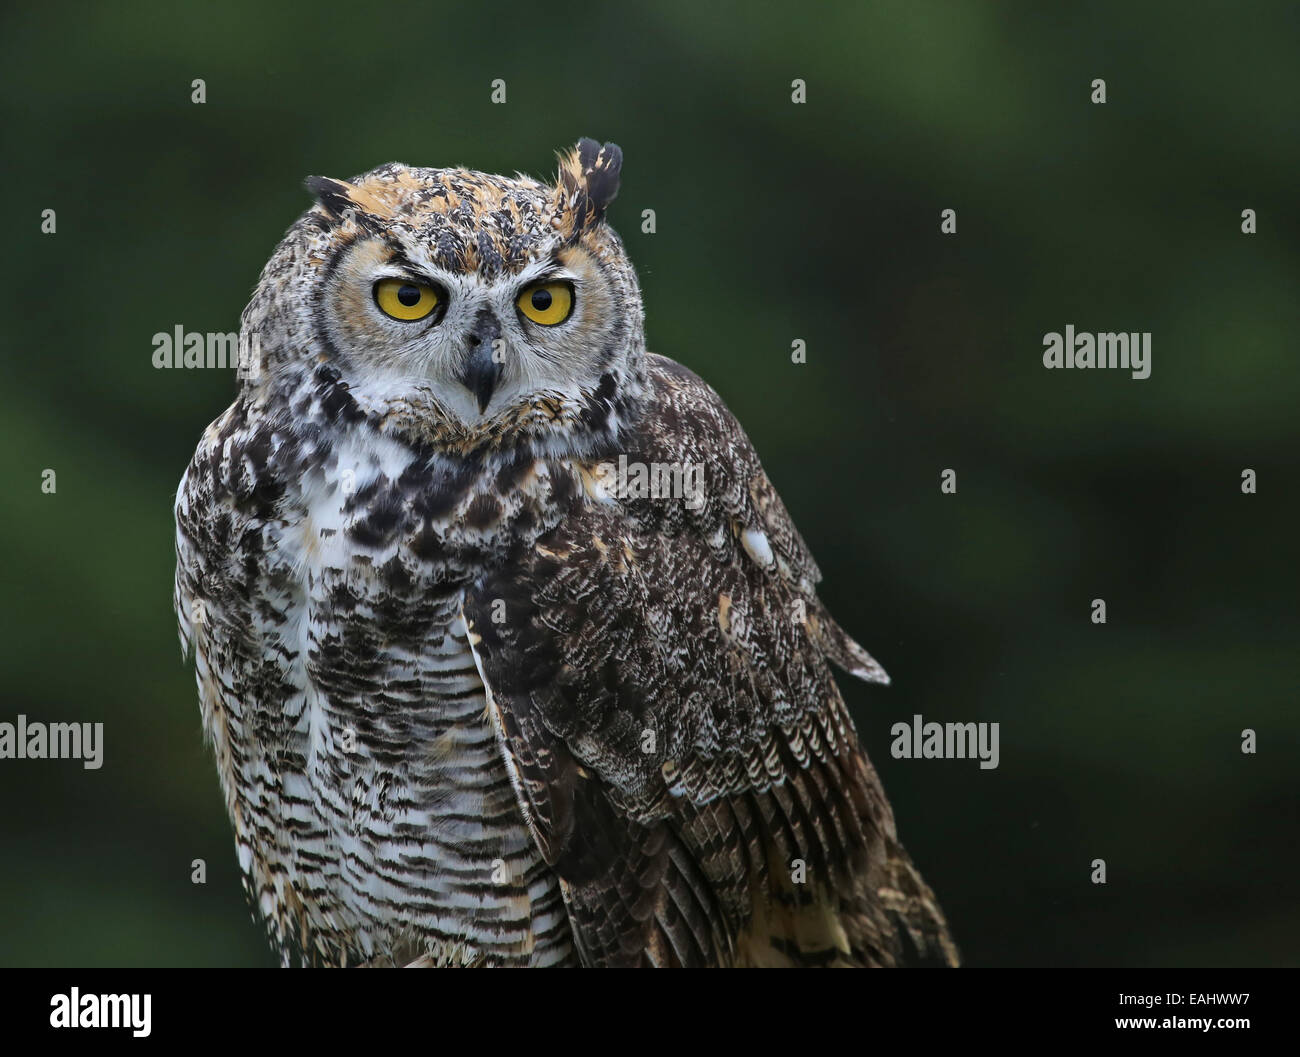 Great Horned Owl Profile Stock Photo